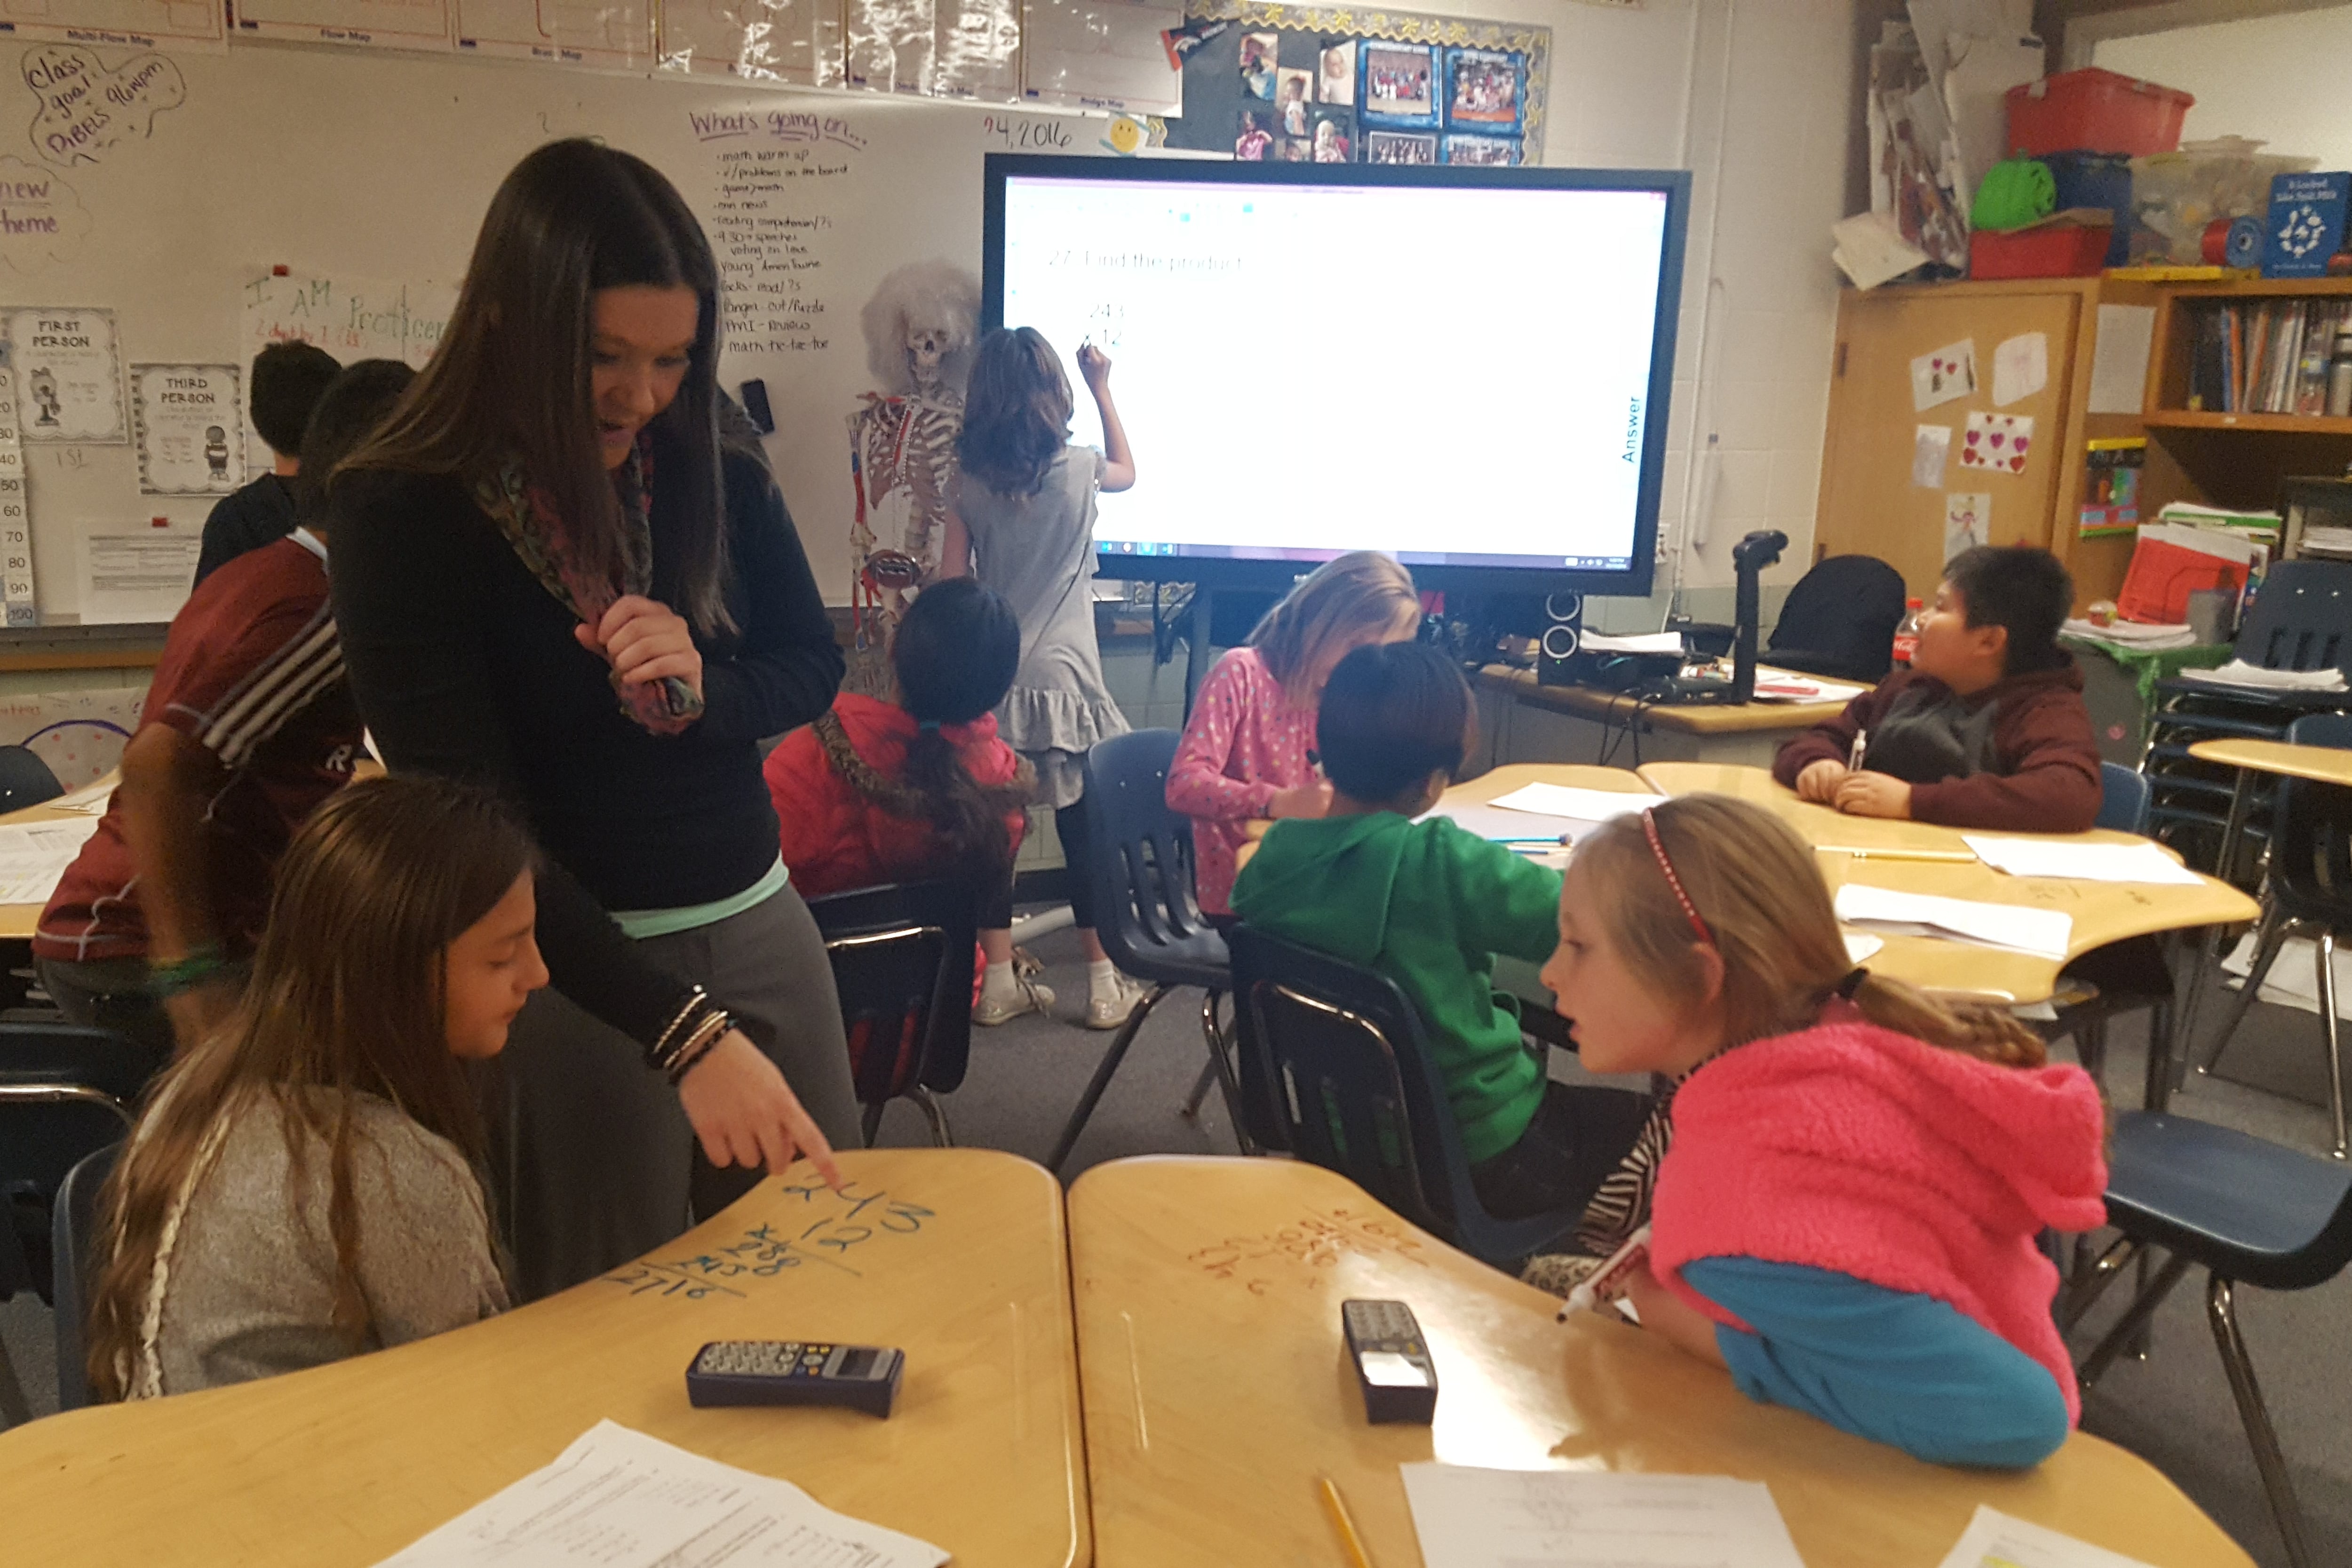 Teacher Amy Adams walks around her classroom checking on students working independently on math at Flynn Elementary School in Westminster. (Photo by Yesenia Robles, Chalkbeat)